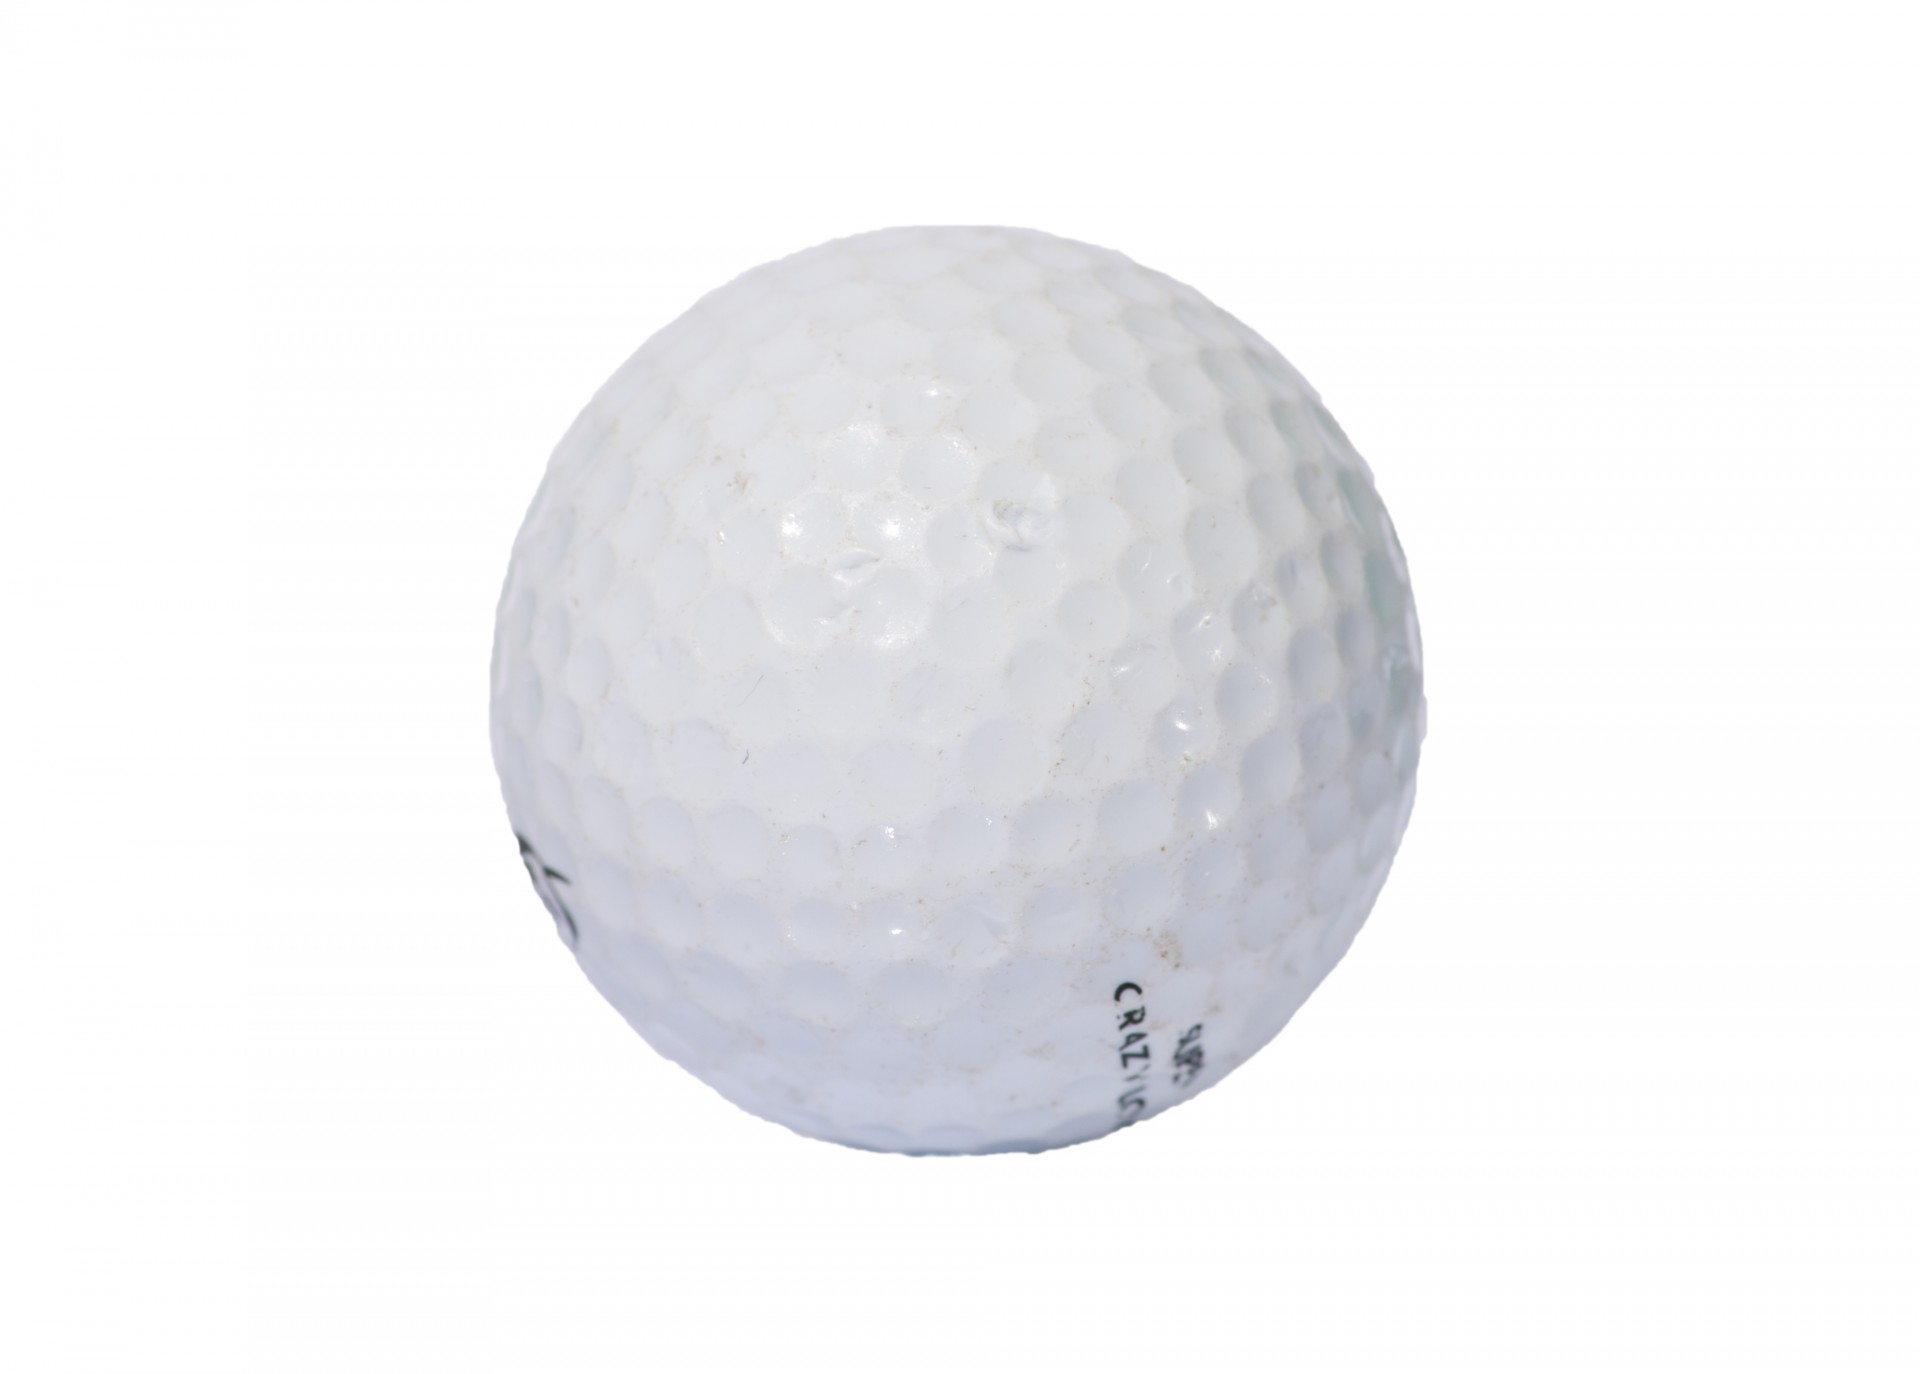 Close-up of a used golf ball on white background